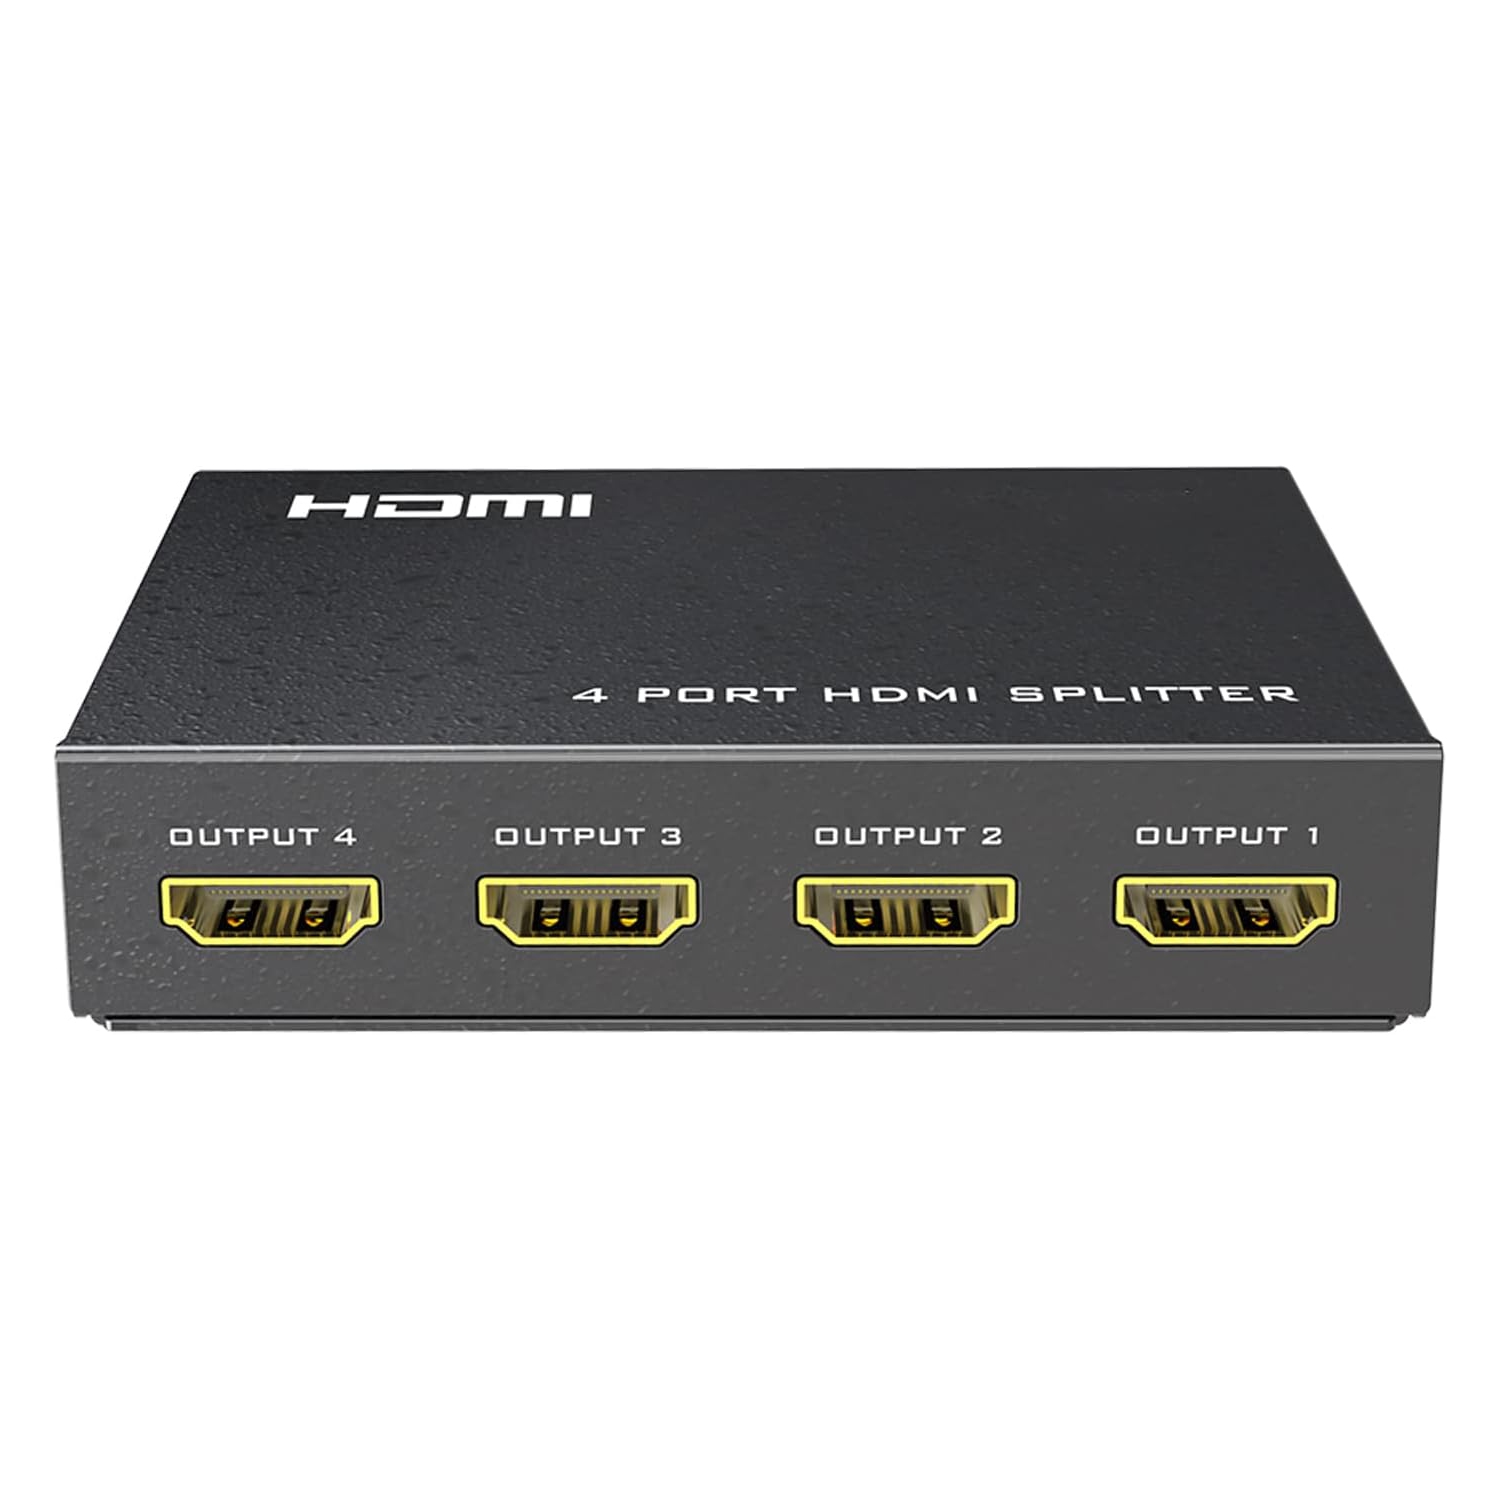 4K 1x4 HDMI Splitter 1 in 4 Out, 4 Ports 4Kx2K@30Hz Premium Quality Full Ultra HD Distributor for PS4 Fire Stick